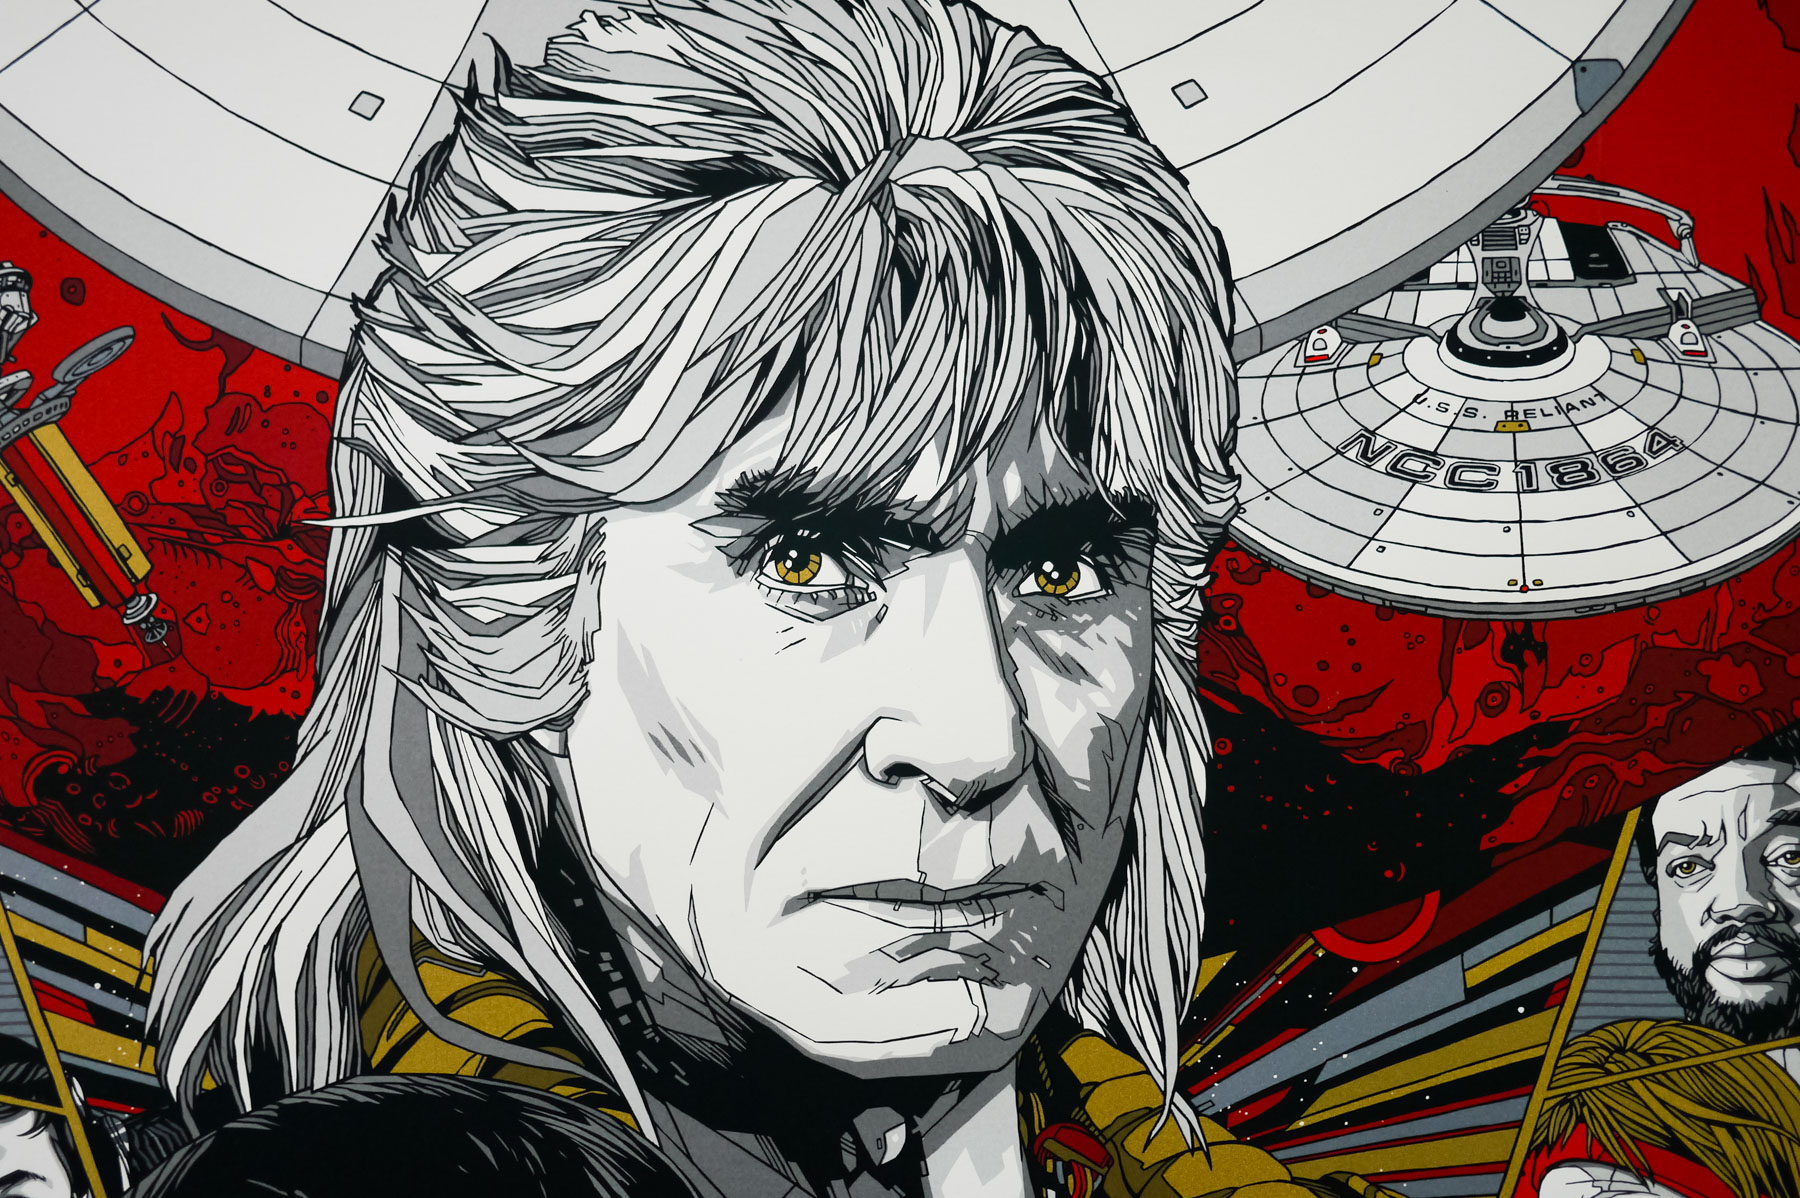 A close-up view of Tyler Stout's portrait of Ricardo Montalban's bad guy Khan.